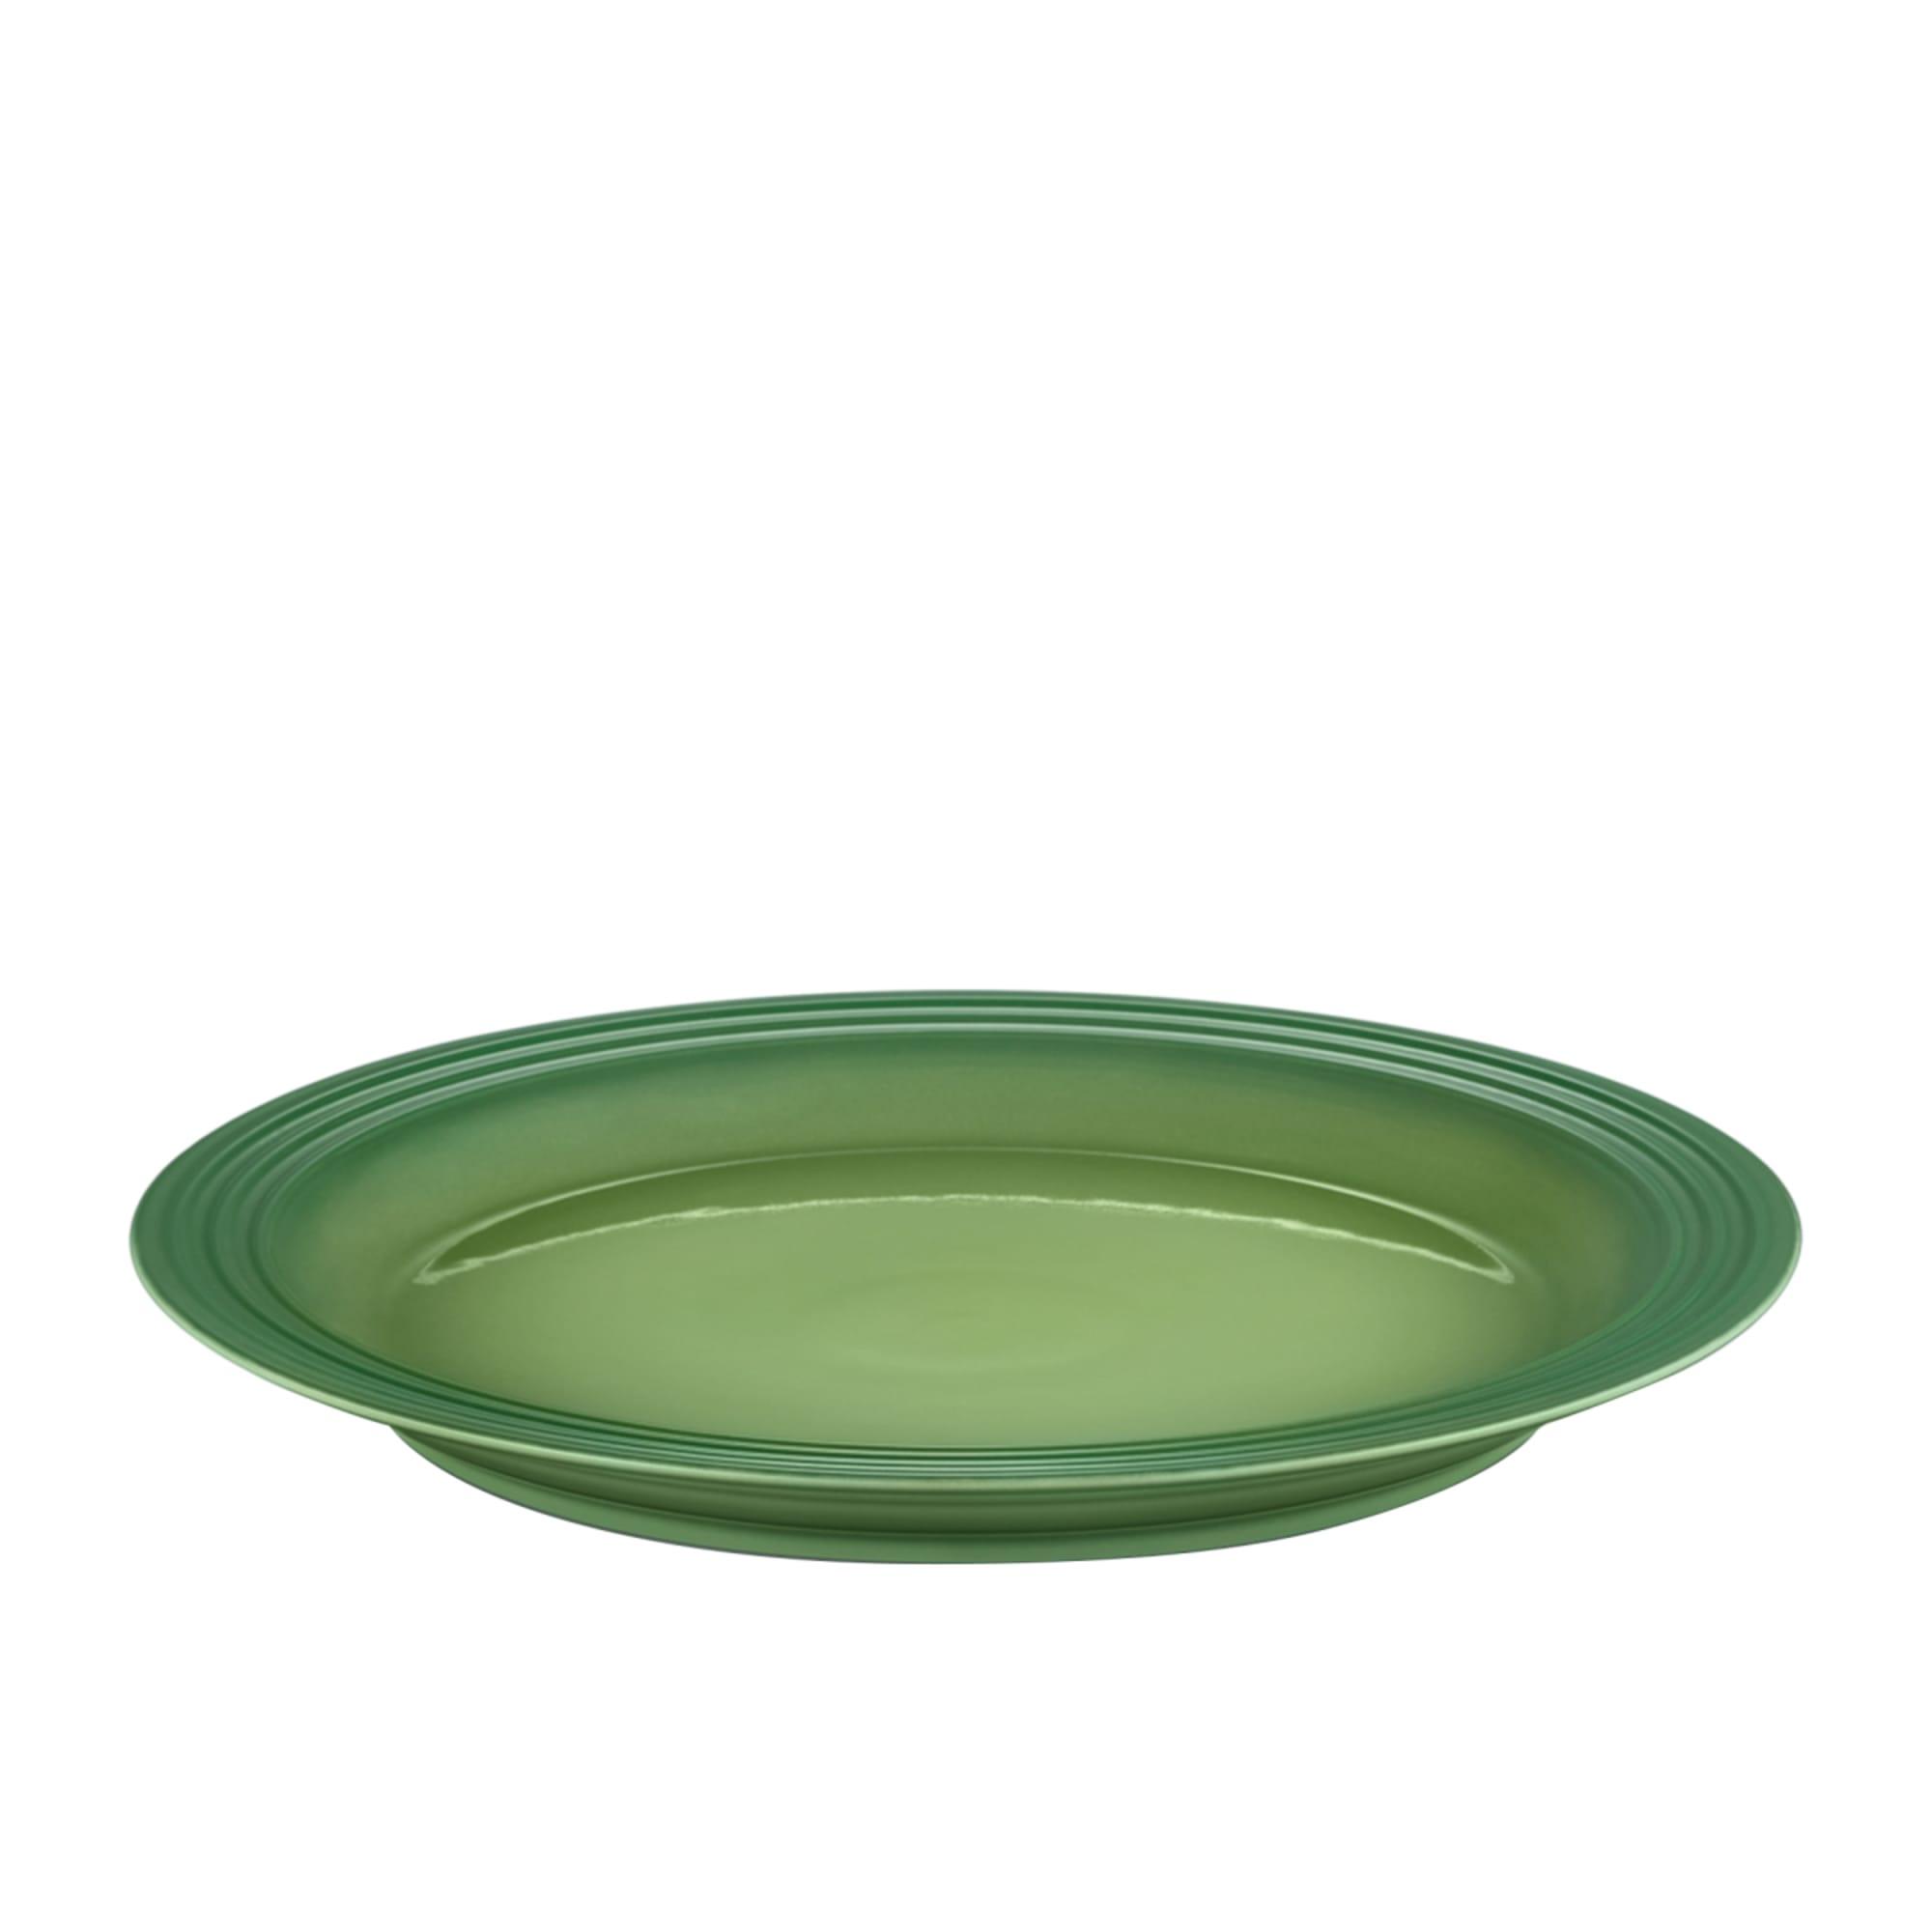 Le Creuset Stoneware Dinner Plate 27cm Bamboo Green Image 3